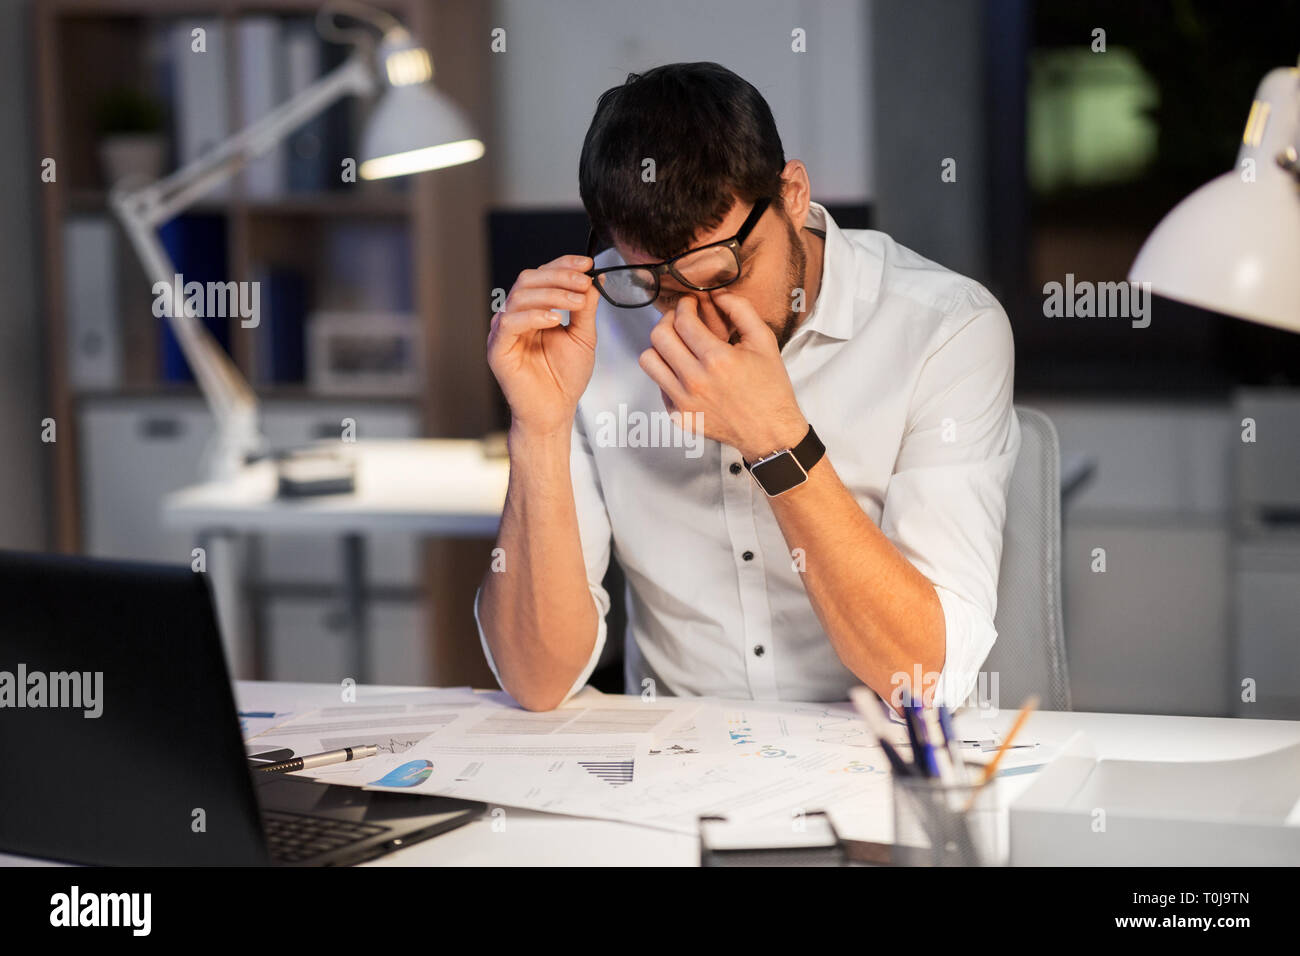 tired businessman working at night office Stock Photo